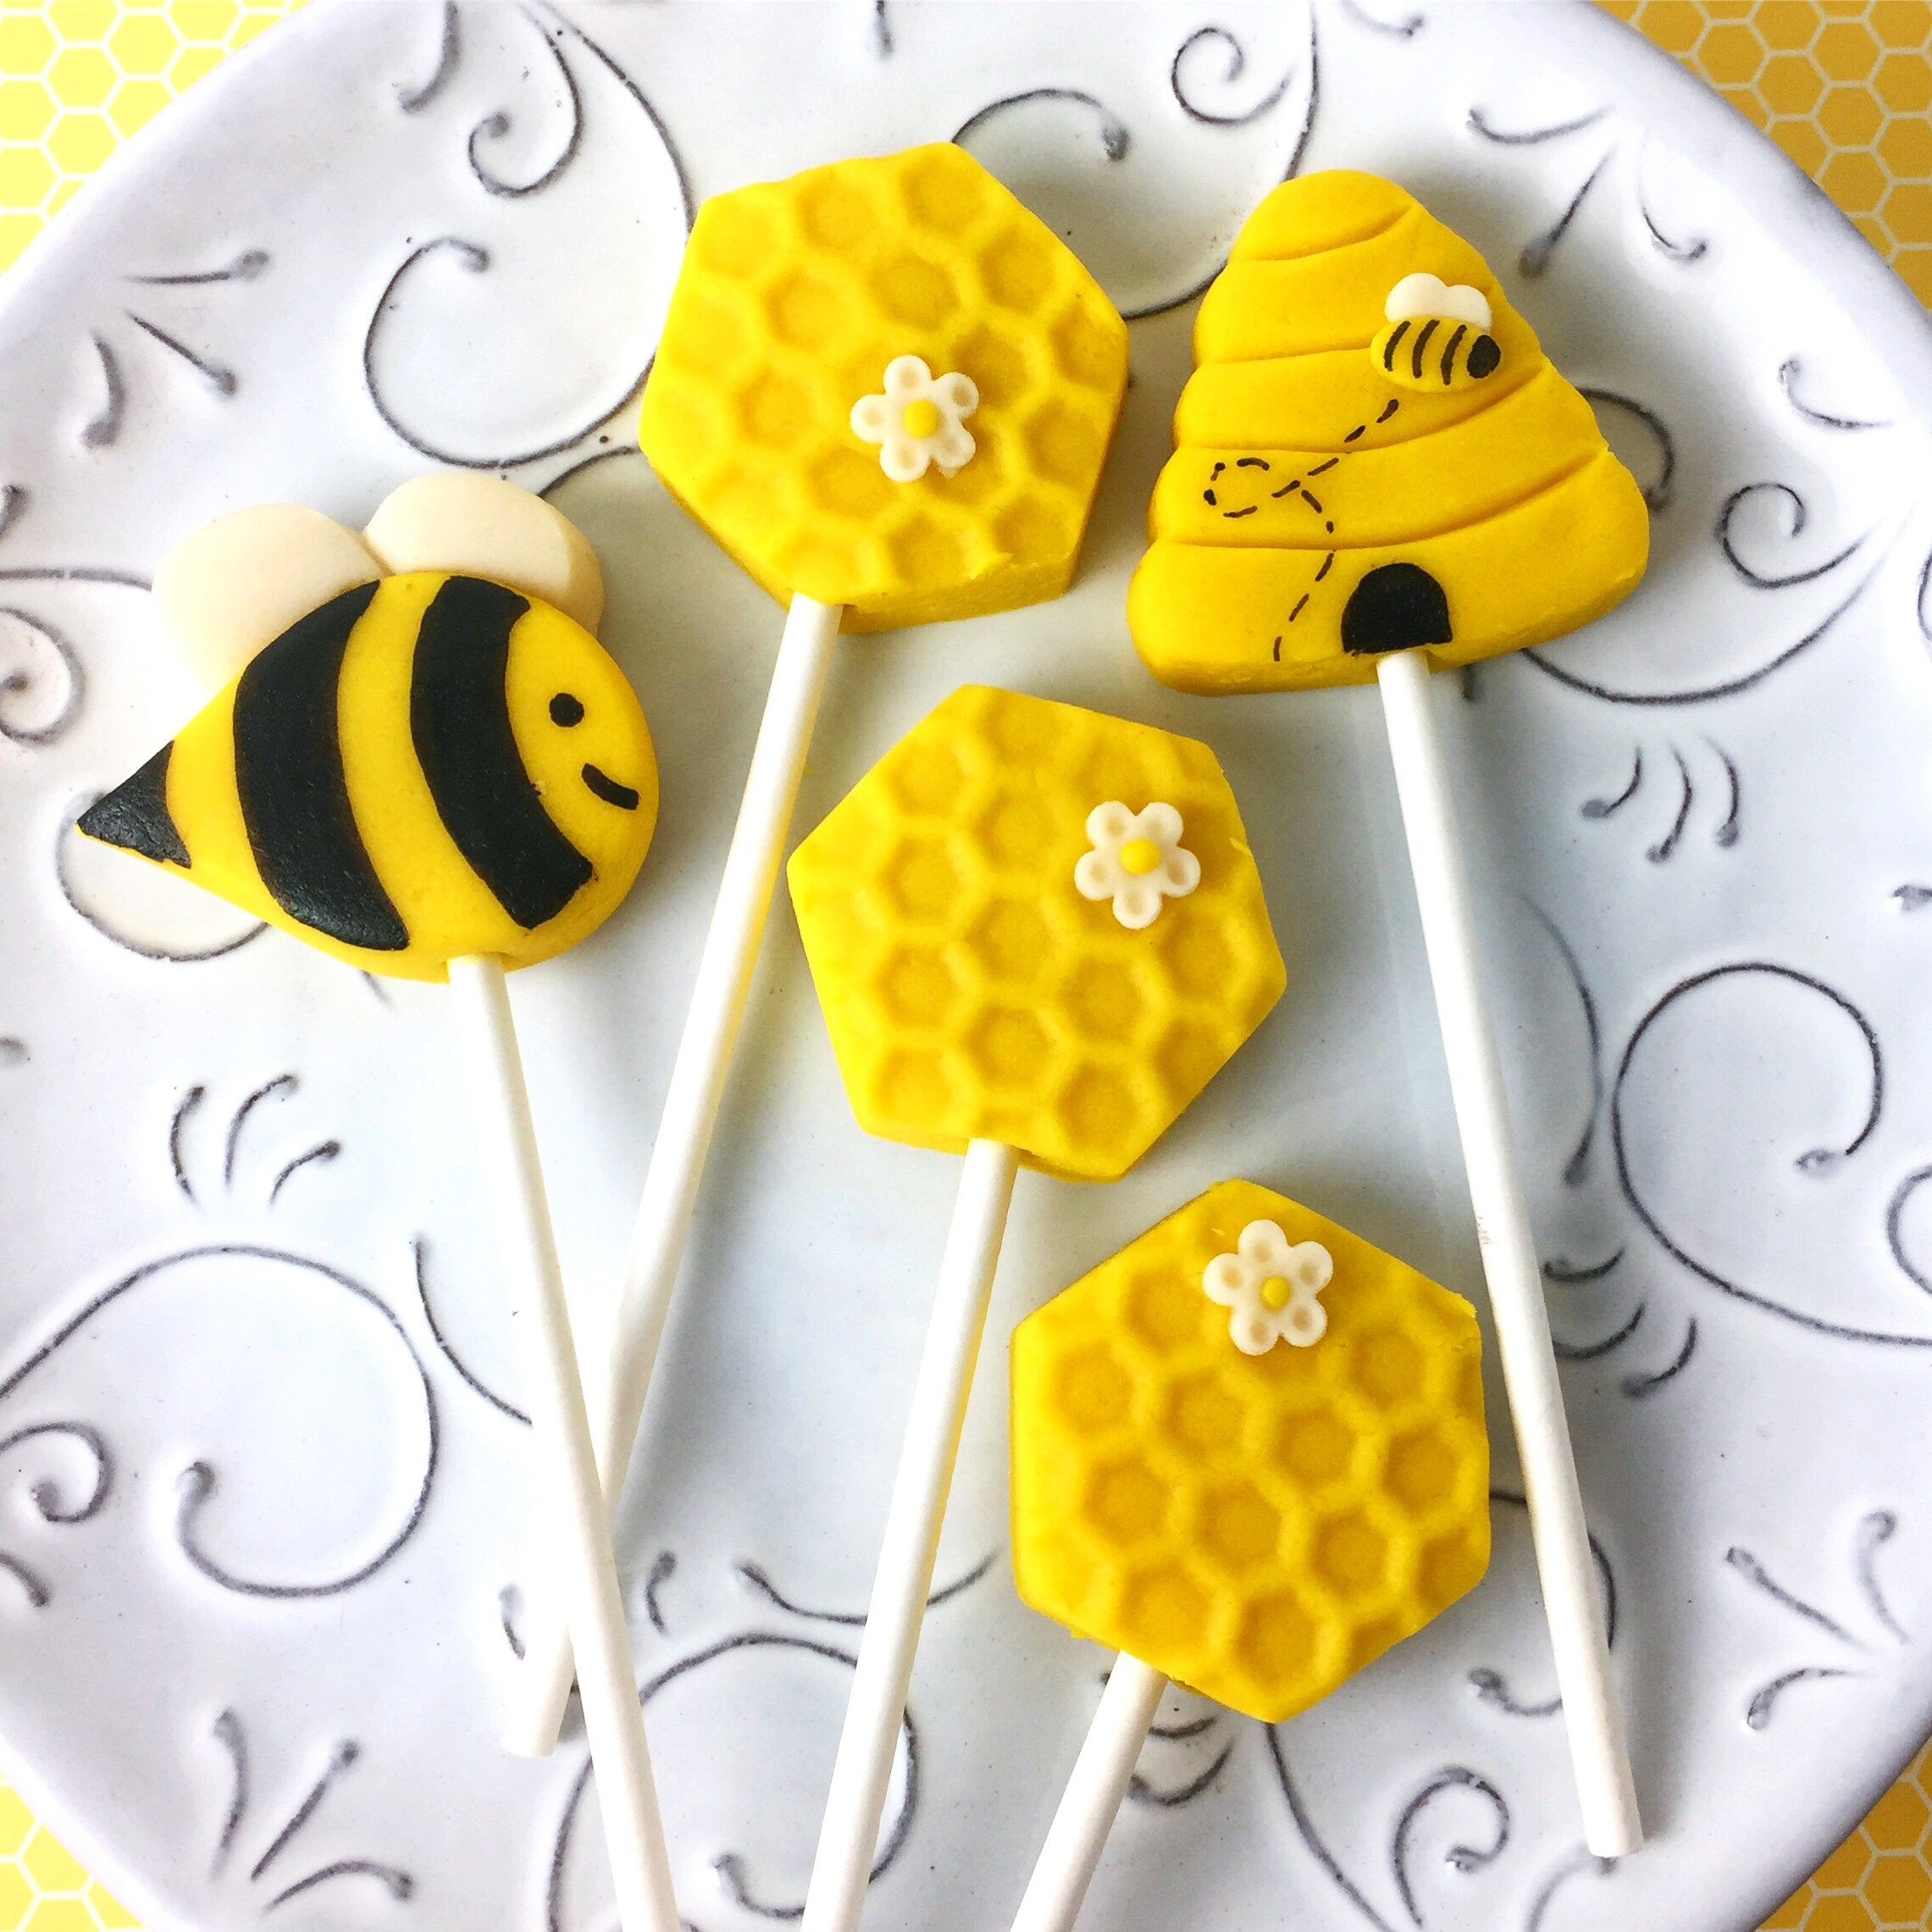 10pk Bumble Bee Lollipop stick holder Party Bags/favour/Yellow